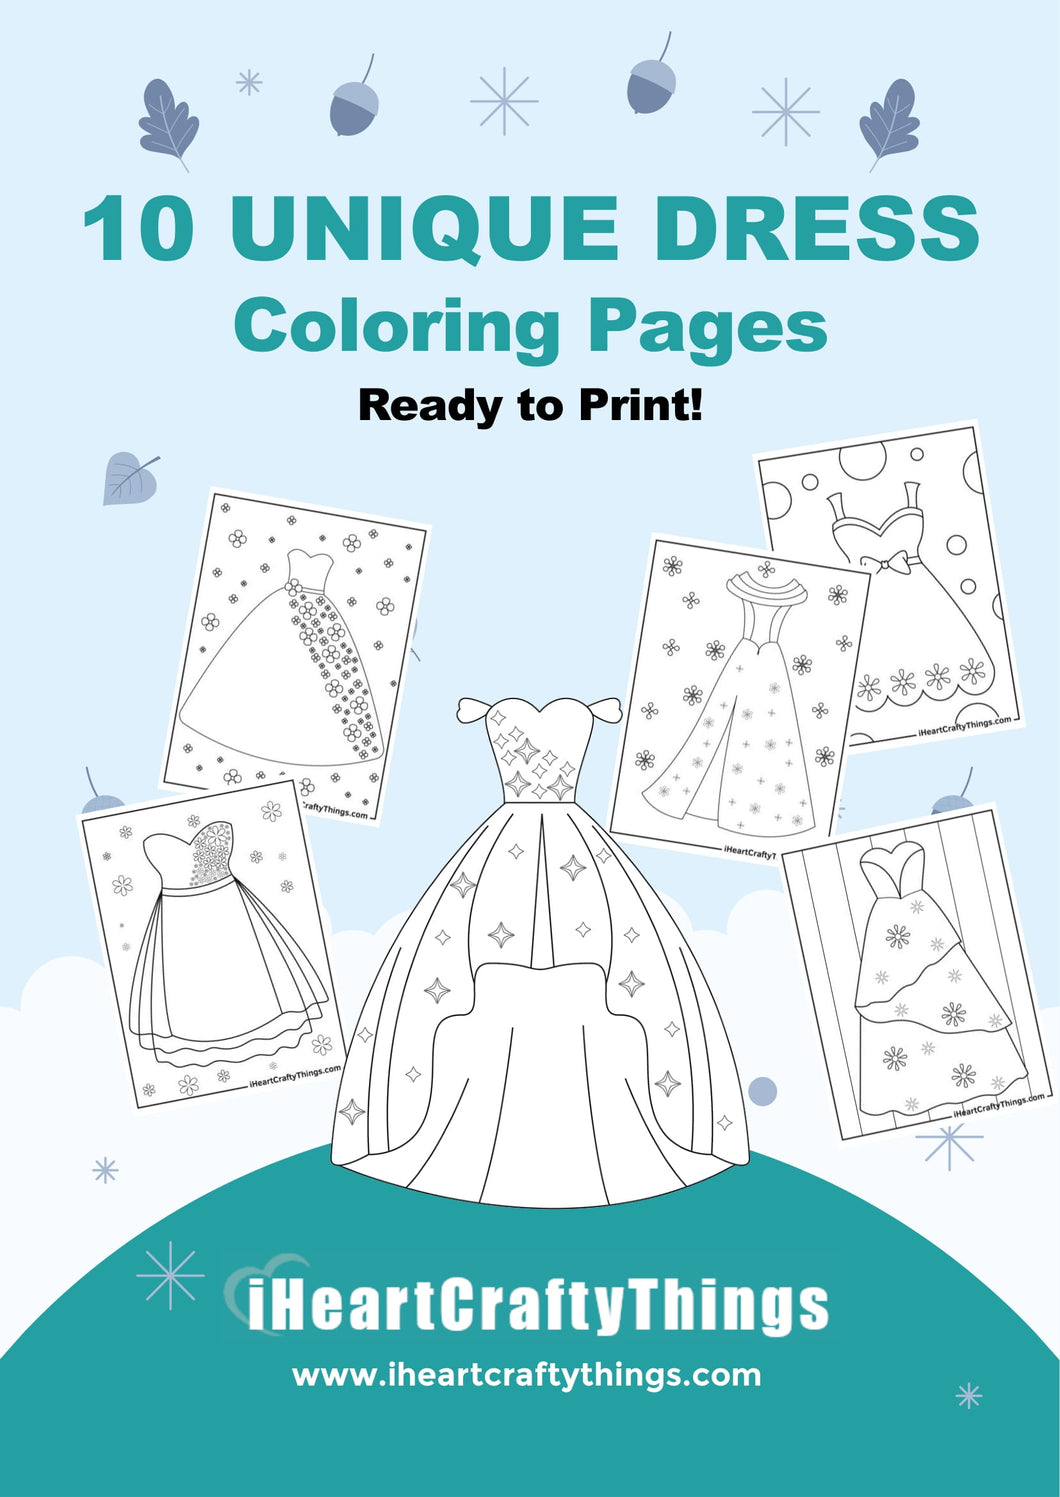 Lovely dress coloring pages â i heart crafty things